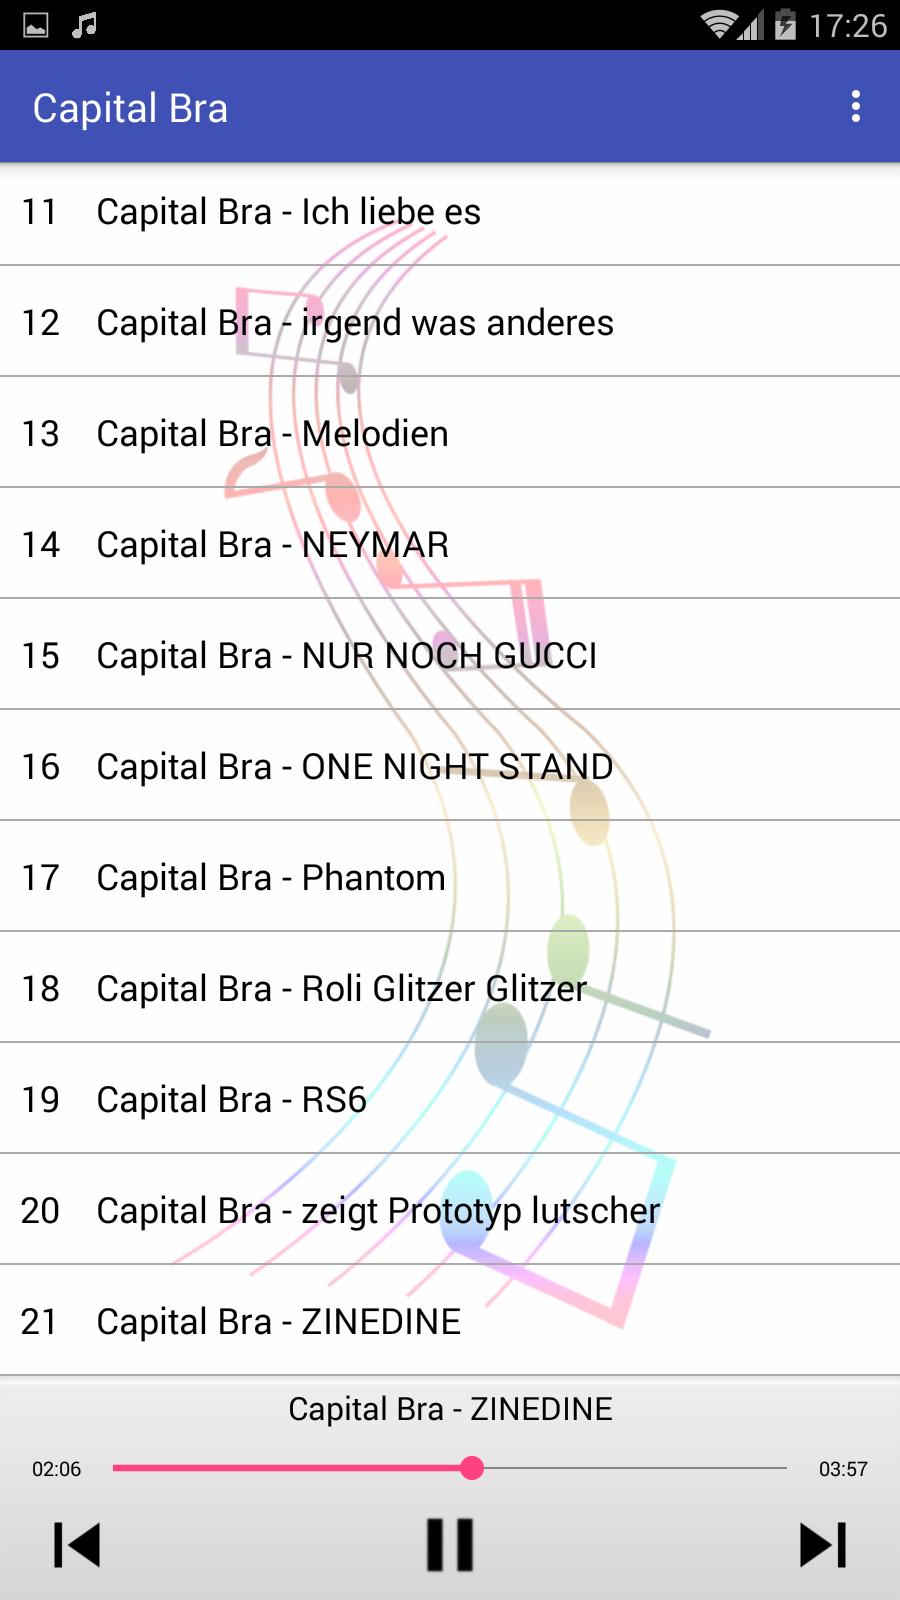 Capital Bra MP3 Songs for Android - APK Download